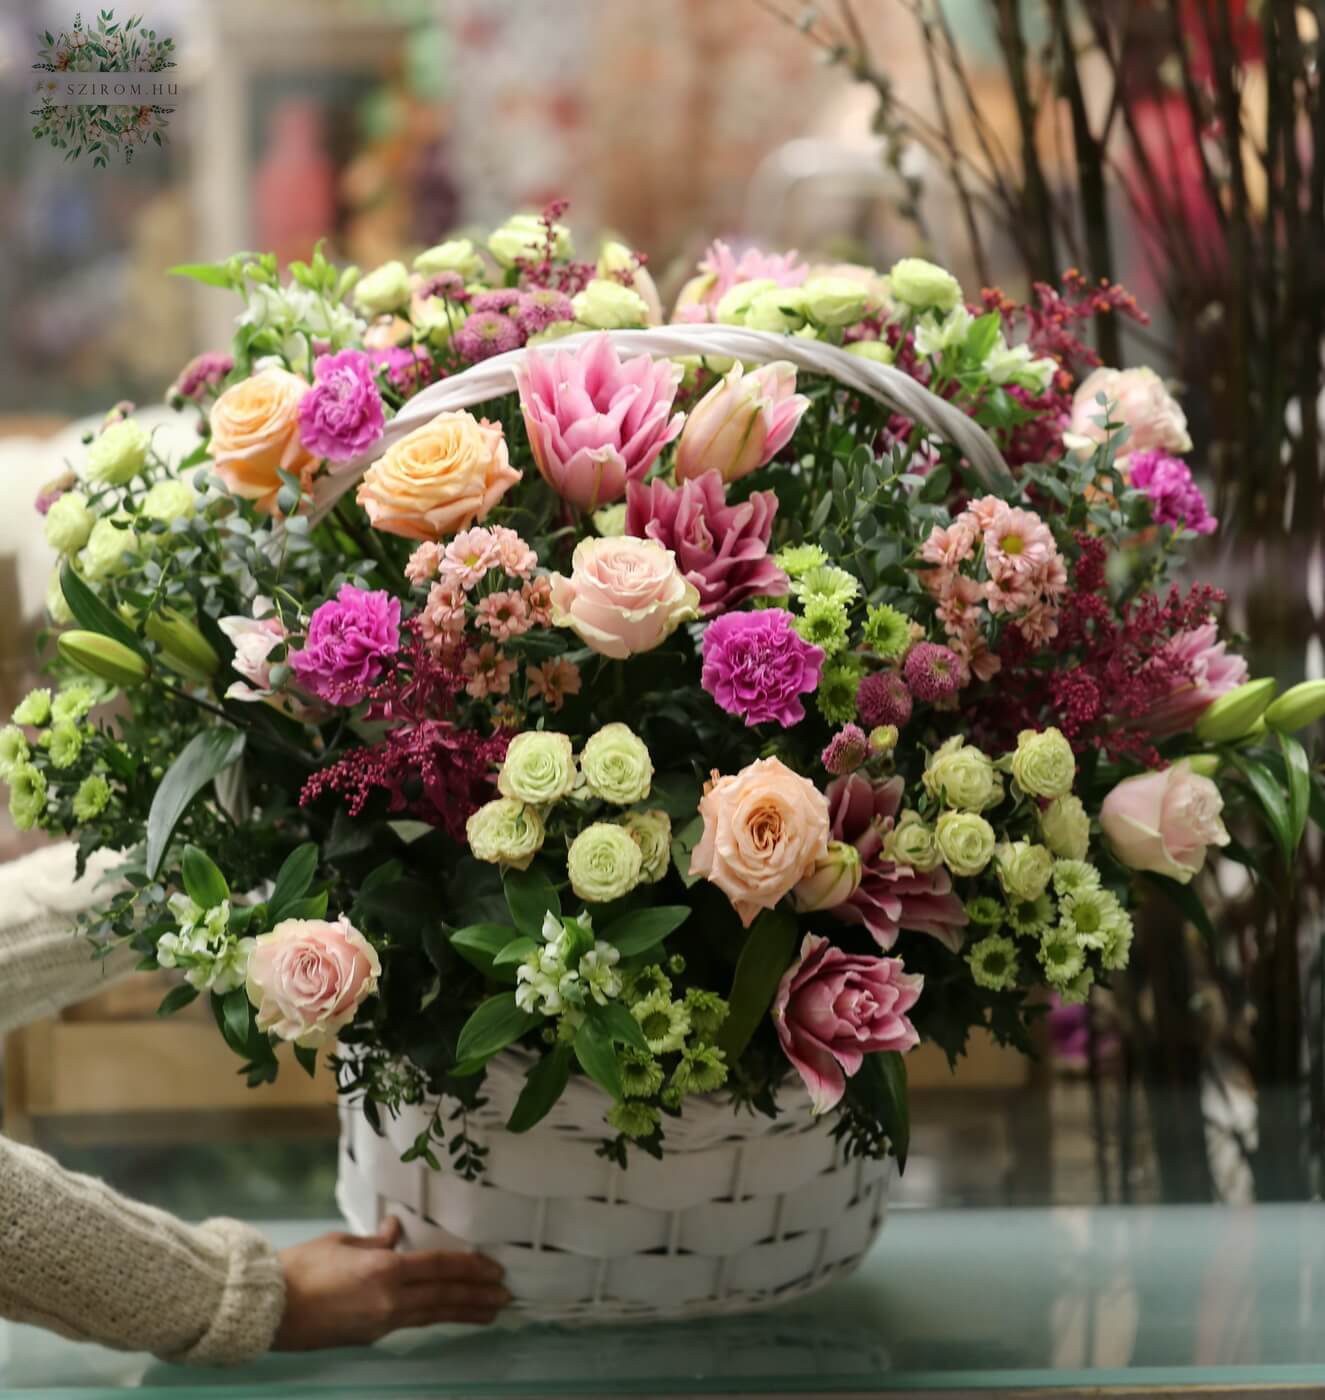 flower delivery Budapest - Big peachy flower basket with roses, lilies, daisies (80 stems)